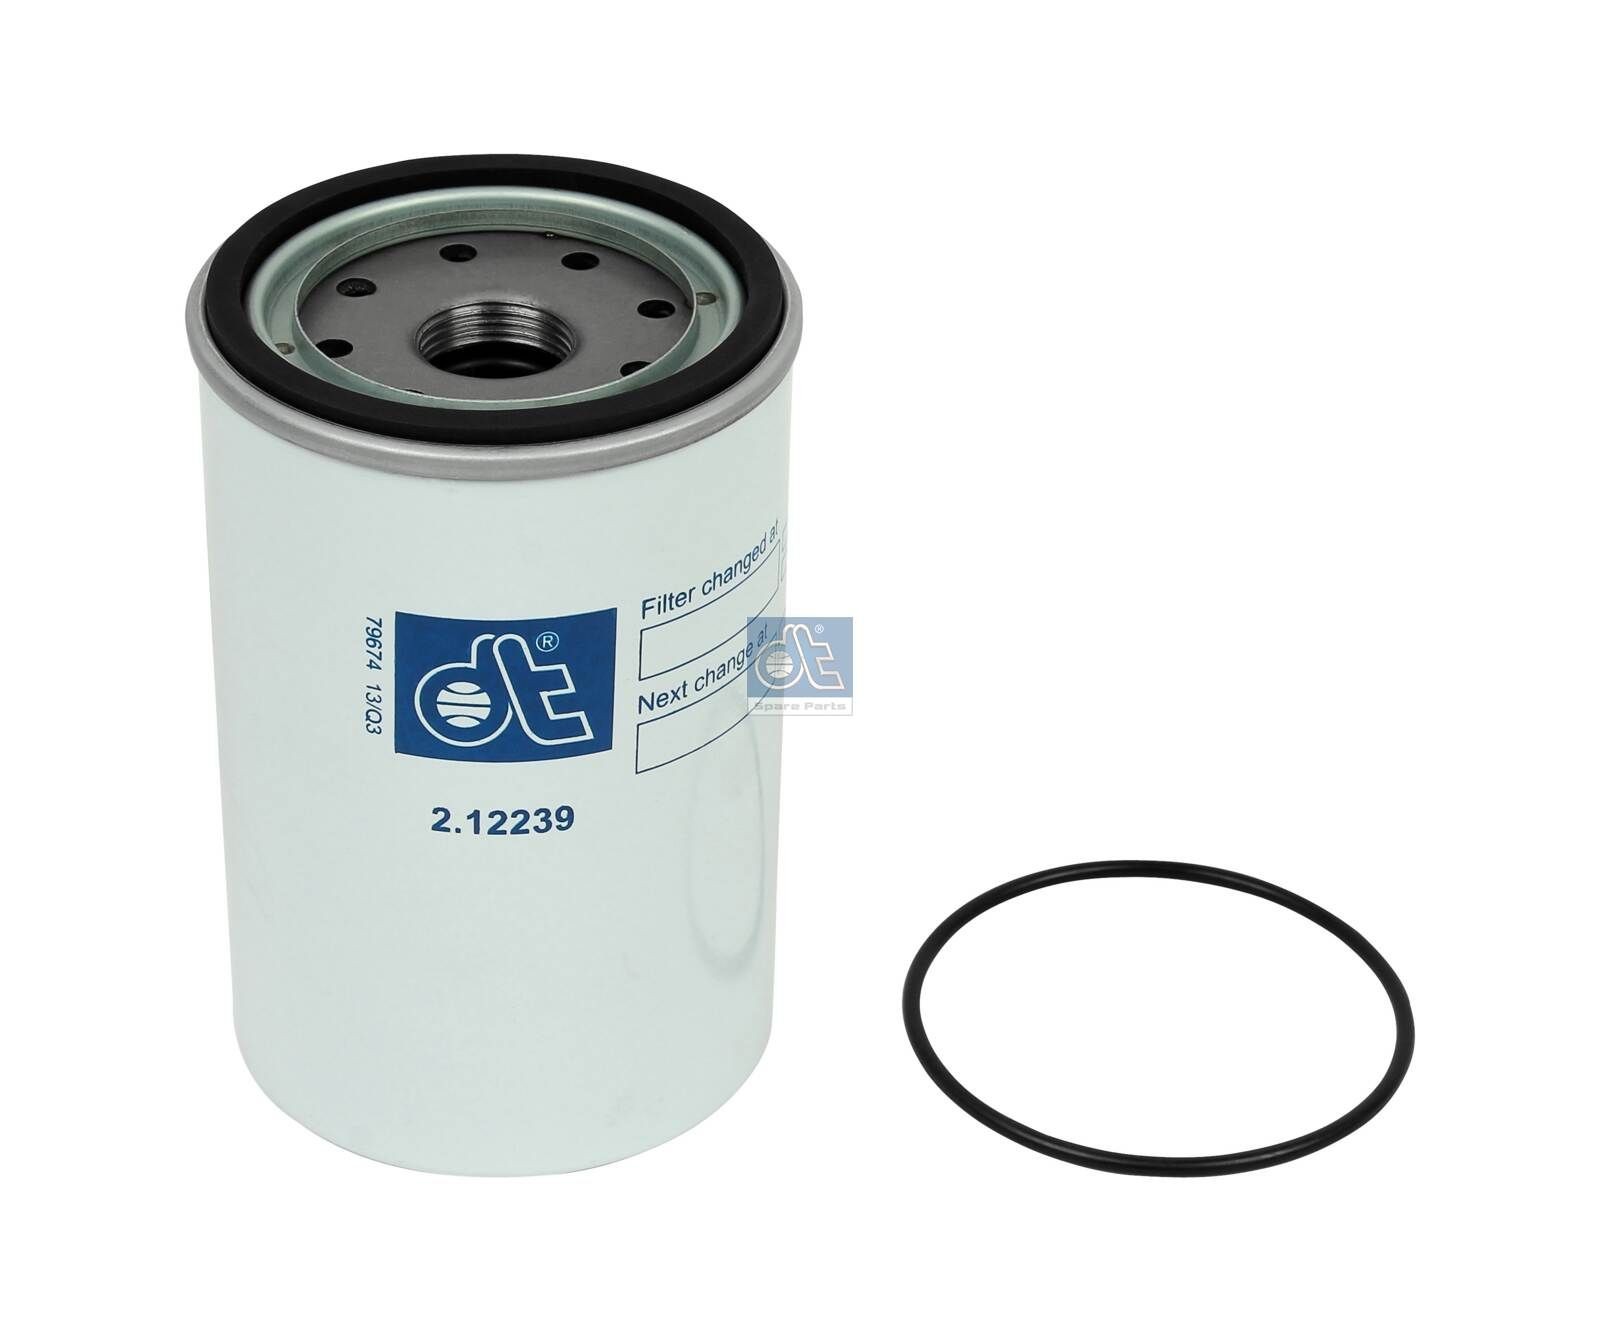 WK 940/33 x DT Spare Parts 2.12239 Fuel filter 2 0480 593